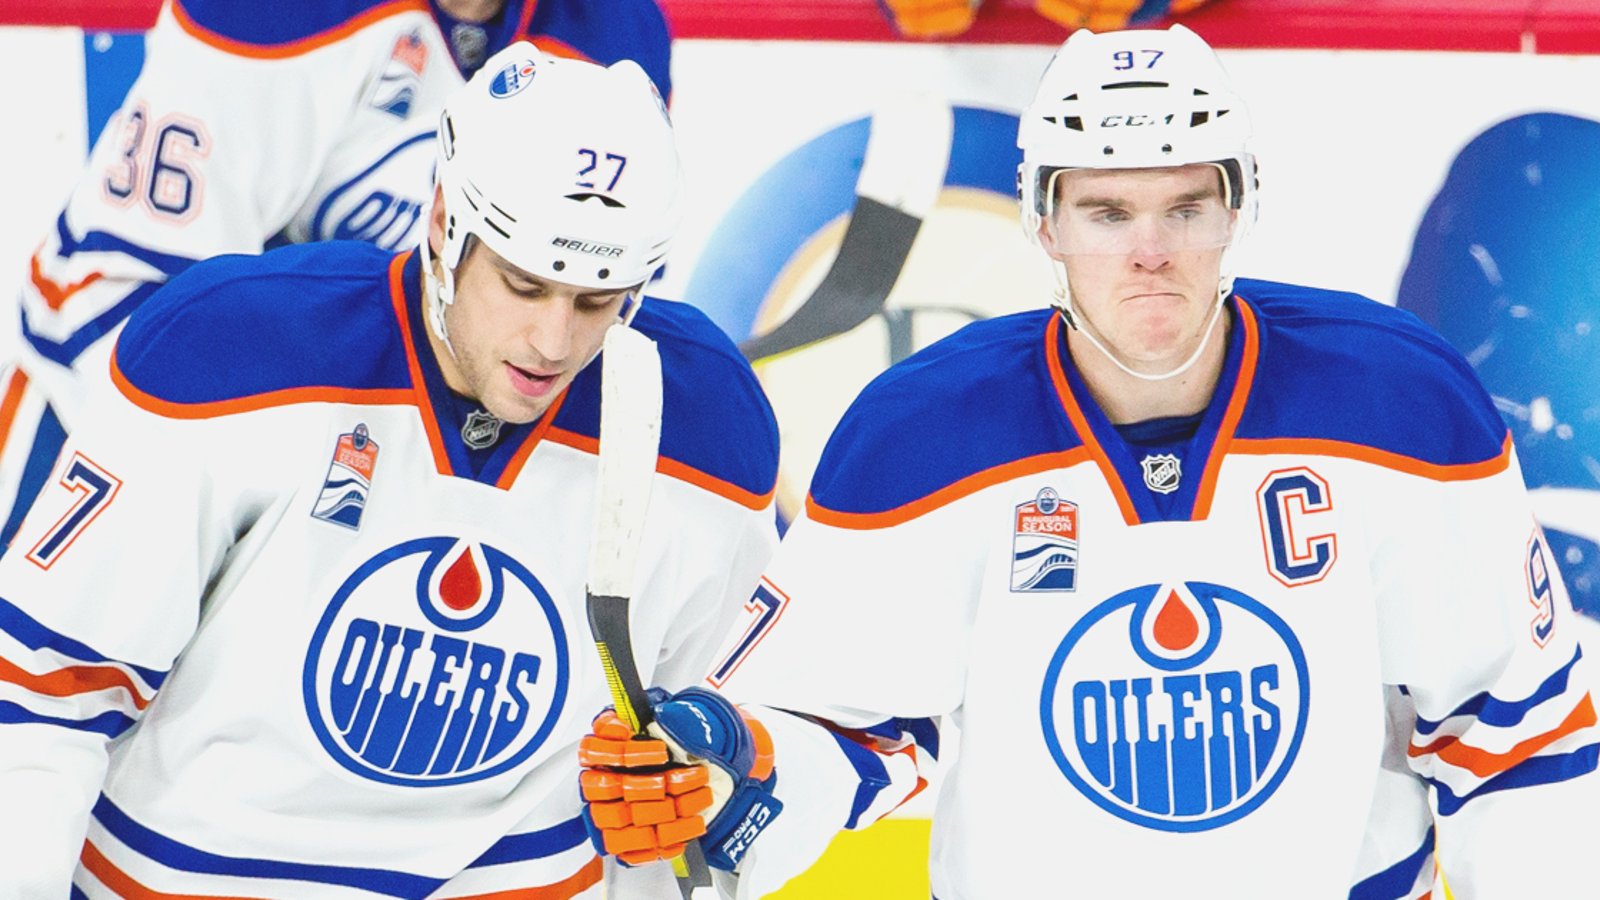 Your call: Are the Oilers legitimate Stanley Cup contenders?